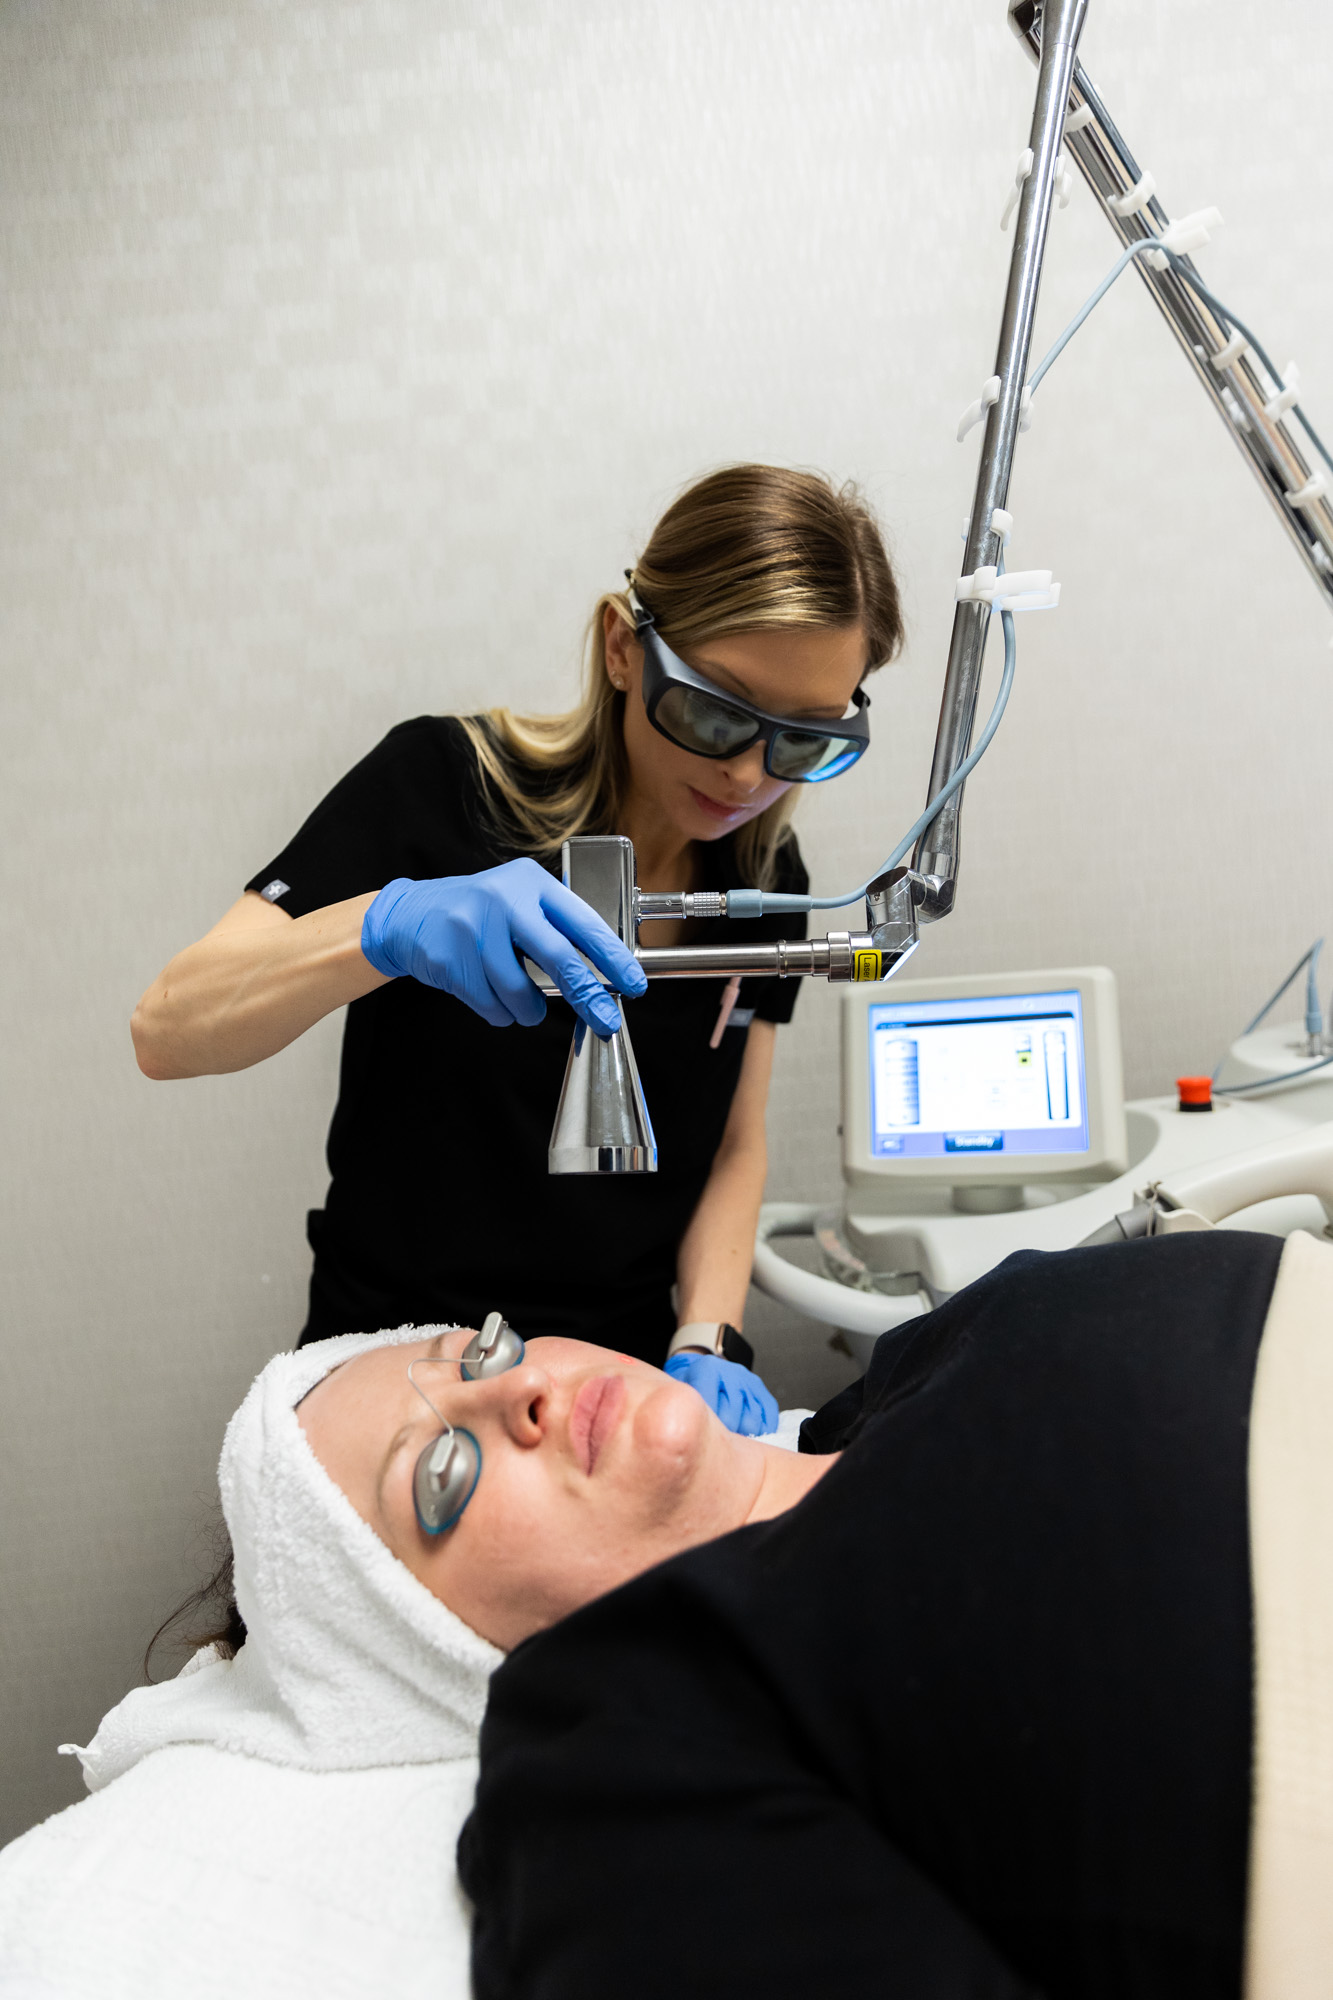 A female Kansas City Skin and Cancer Center provider uses the Micro Laser device to perform a Micro Laser Peel on a female client. Client is wearing protective eye coverings and has a towel covering her hair.